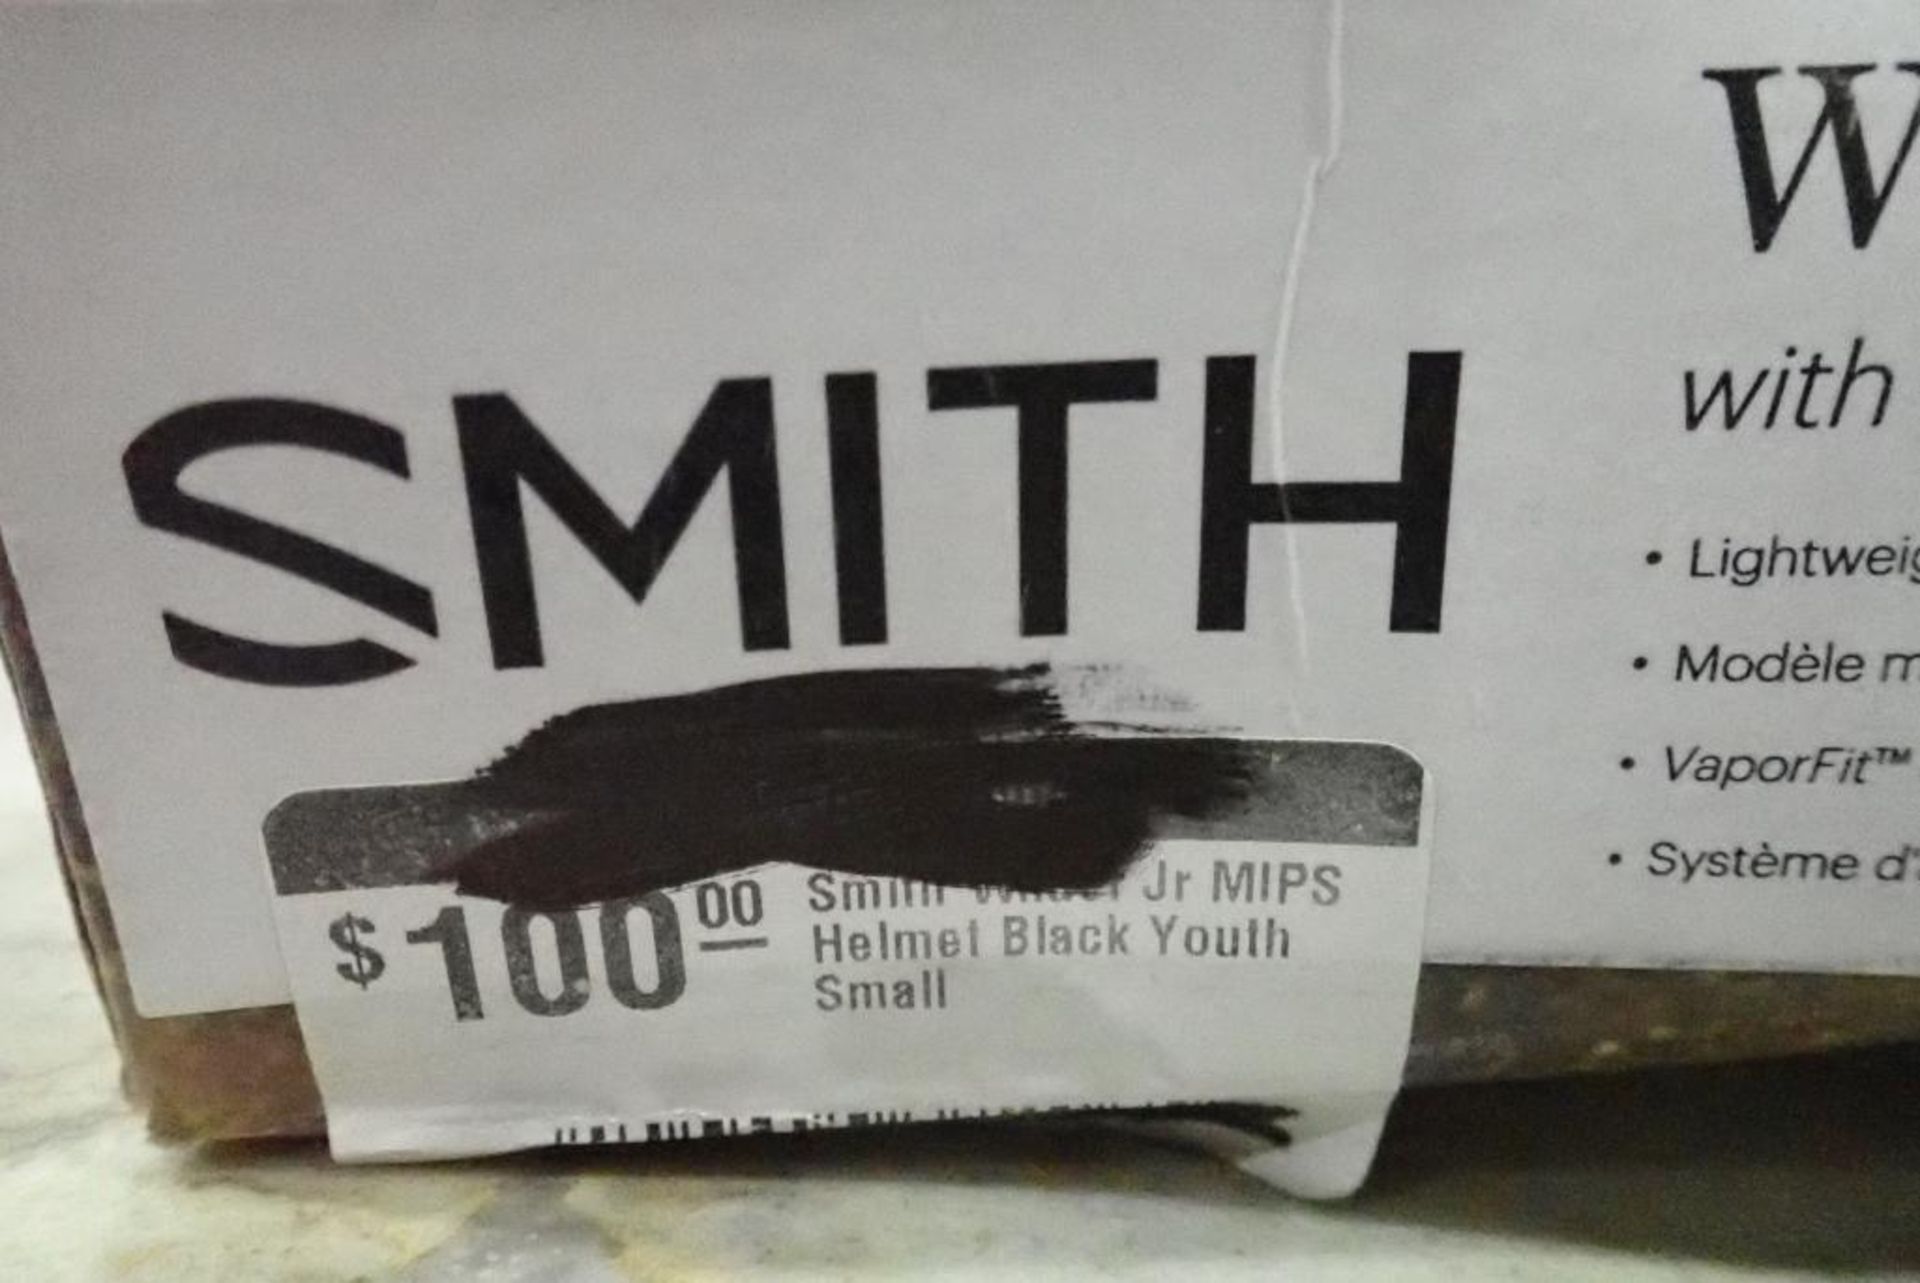 Lot of (2) Smith MIPS Youth Small Helmets- Black. - Image 3 of 3